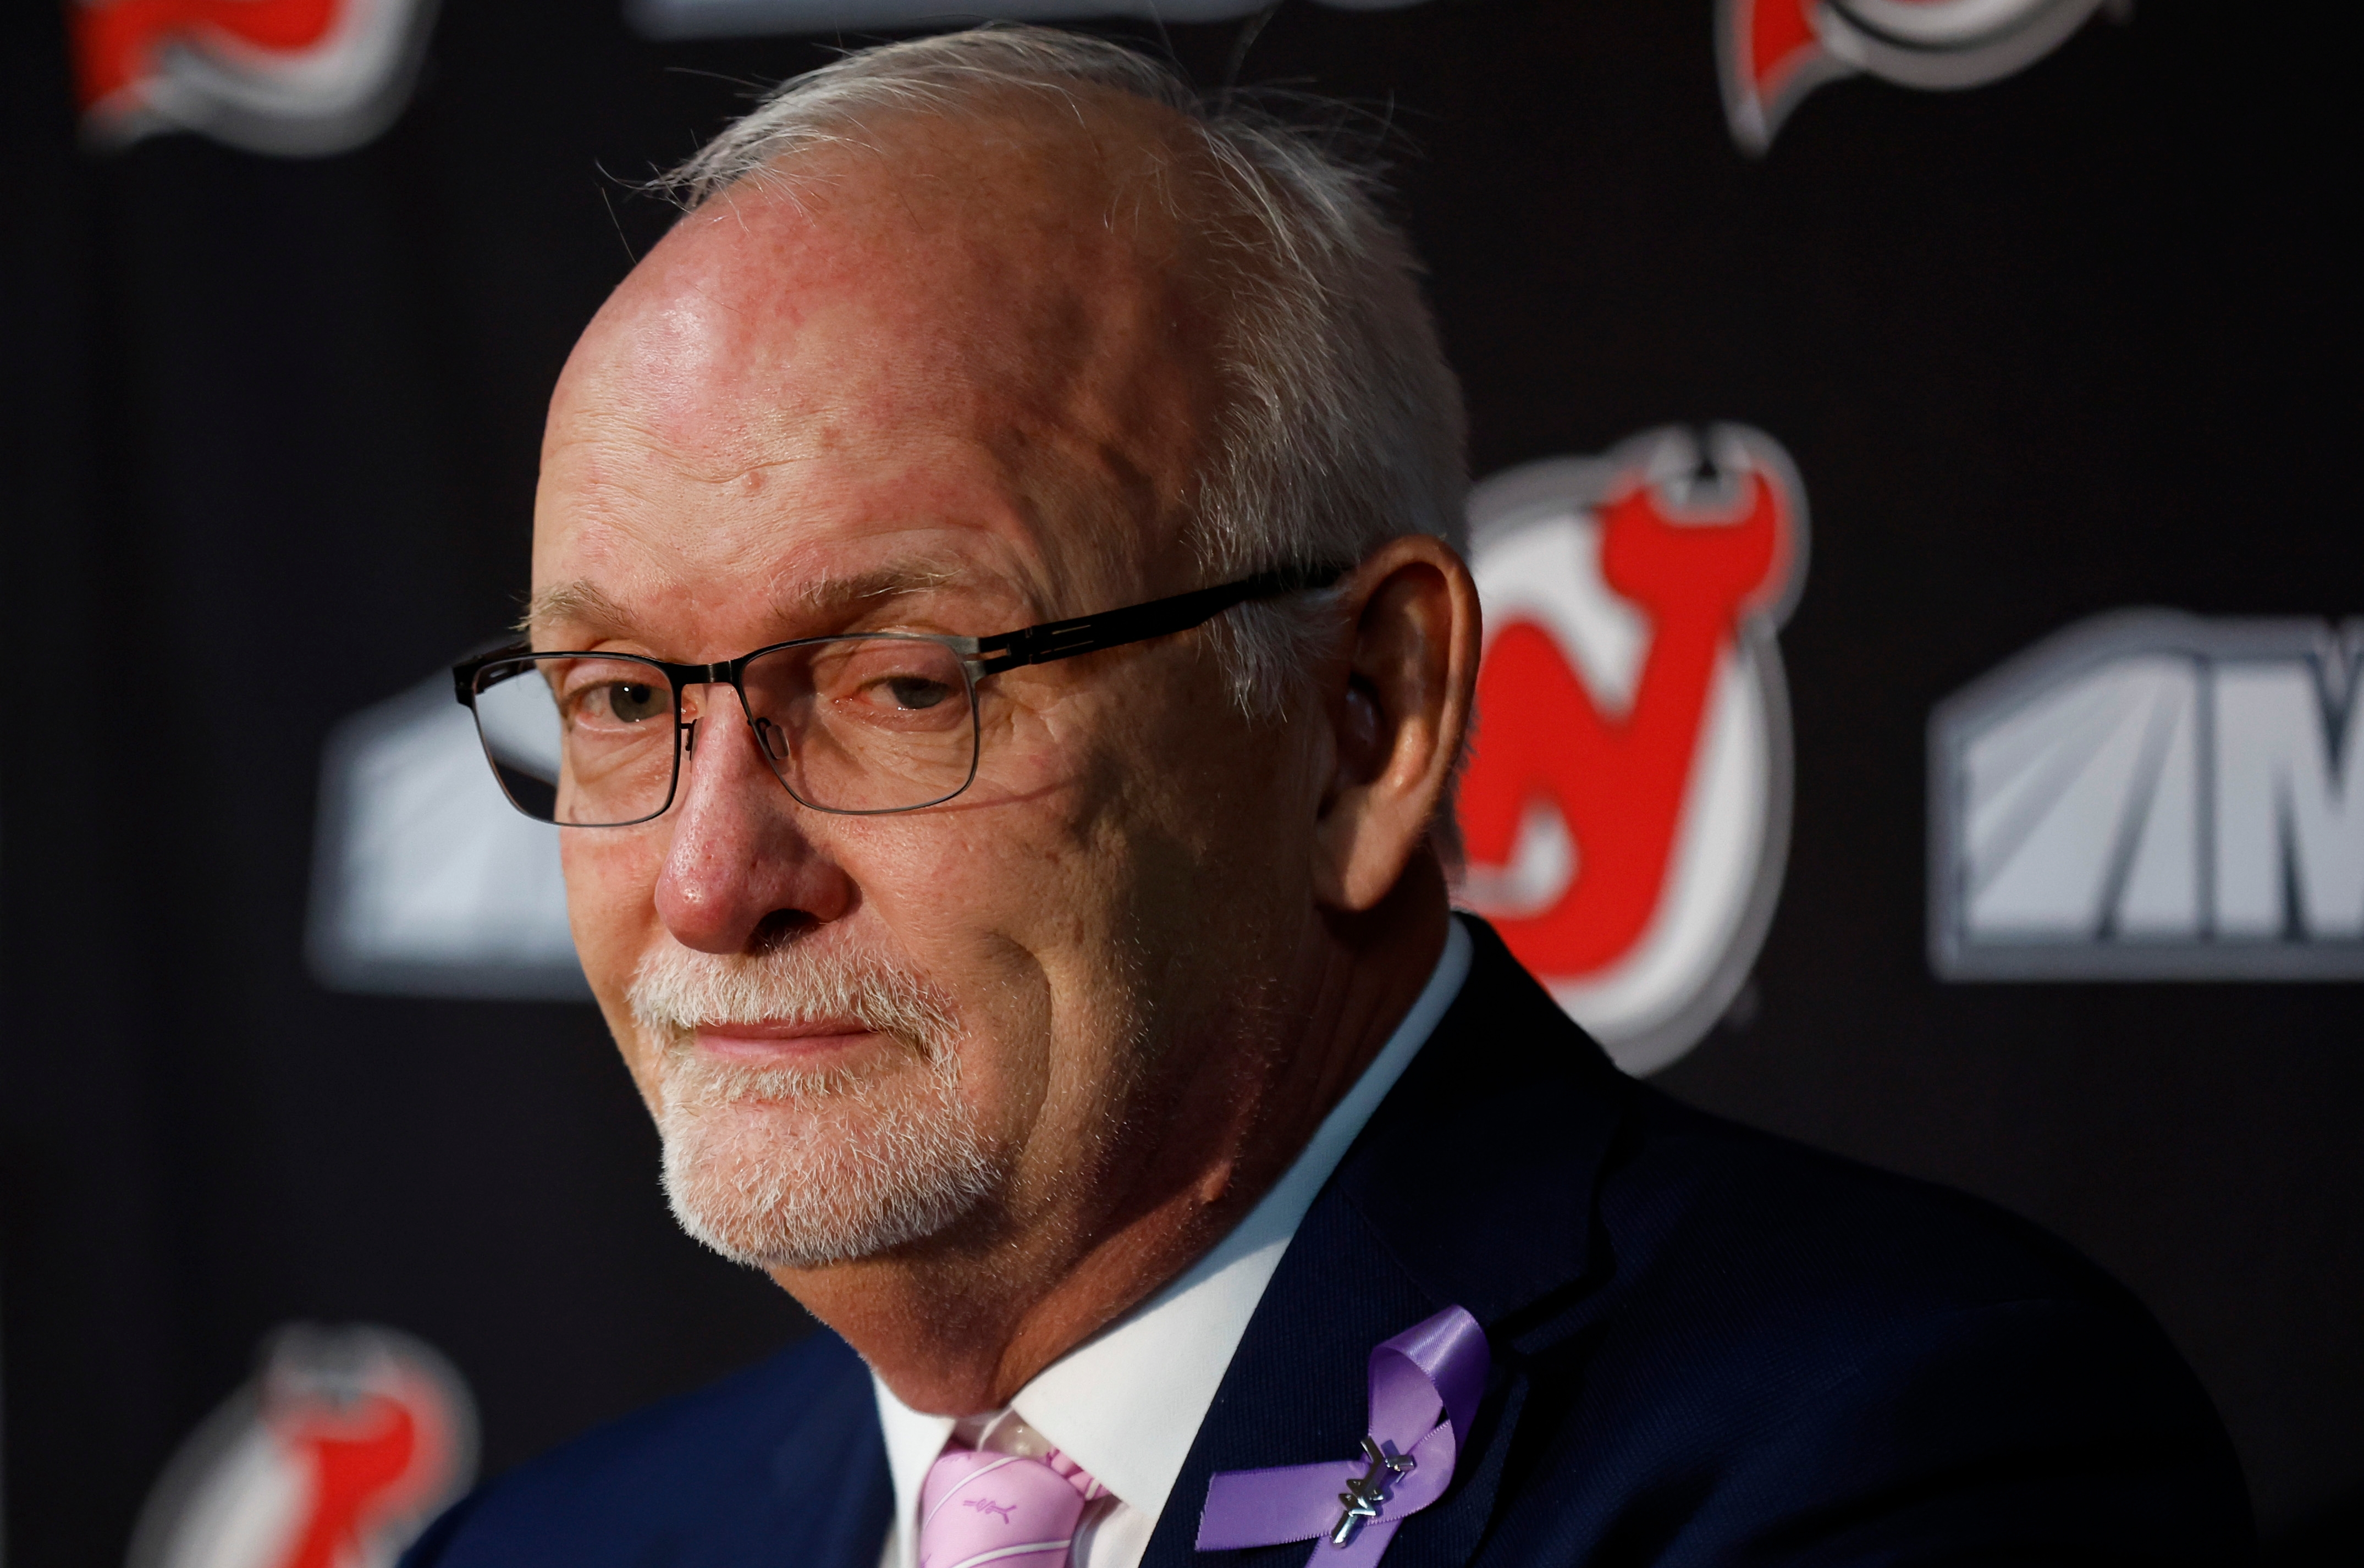 New Jersey Devils Head Coach Lindy Ruff Signs Extension